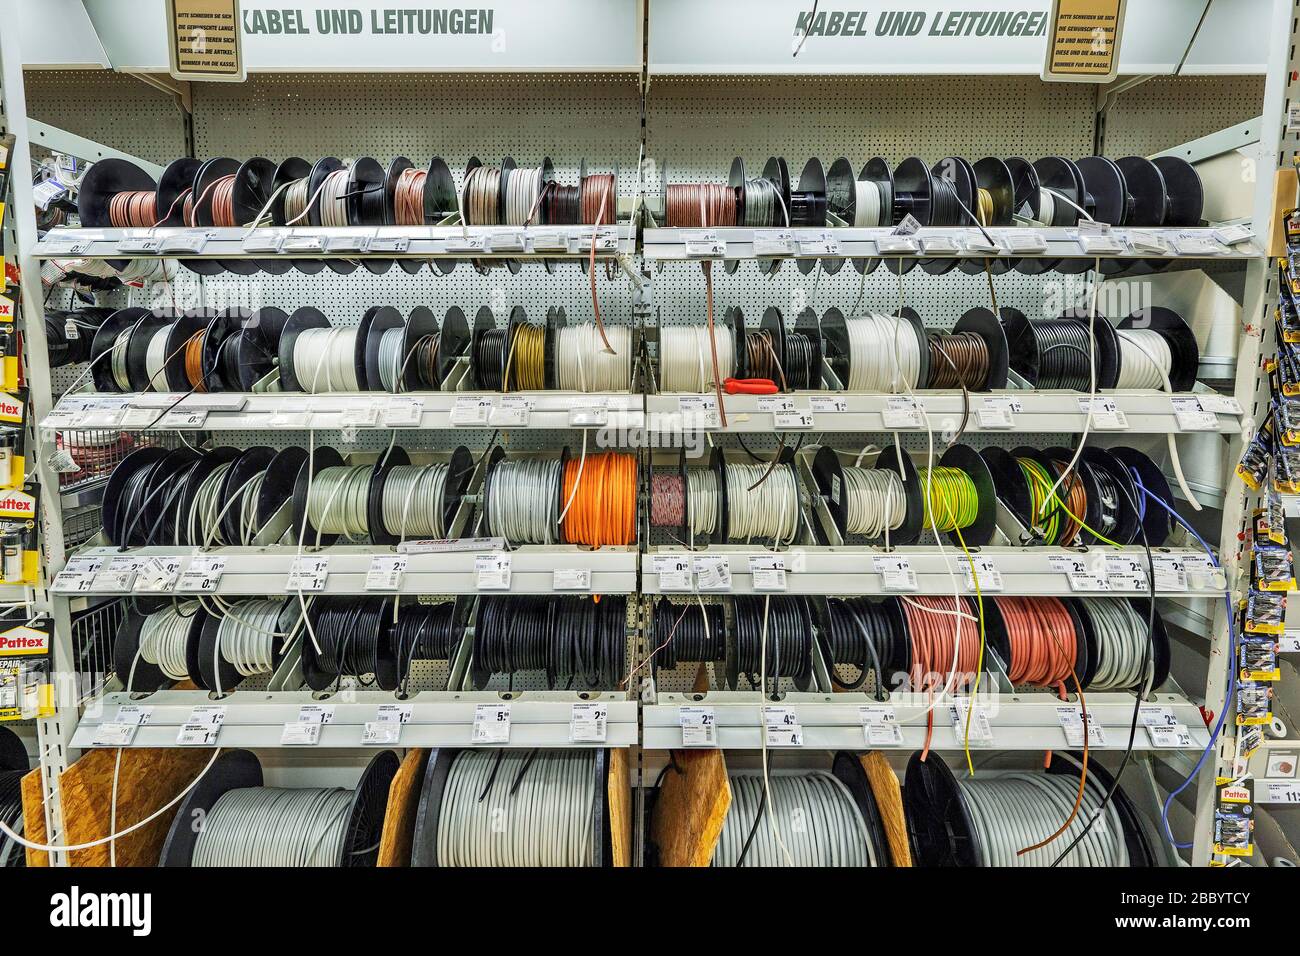 Cable and wire, self-service, hardware store, Bavaria, Germany Stock Photo